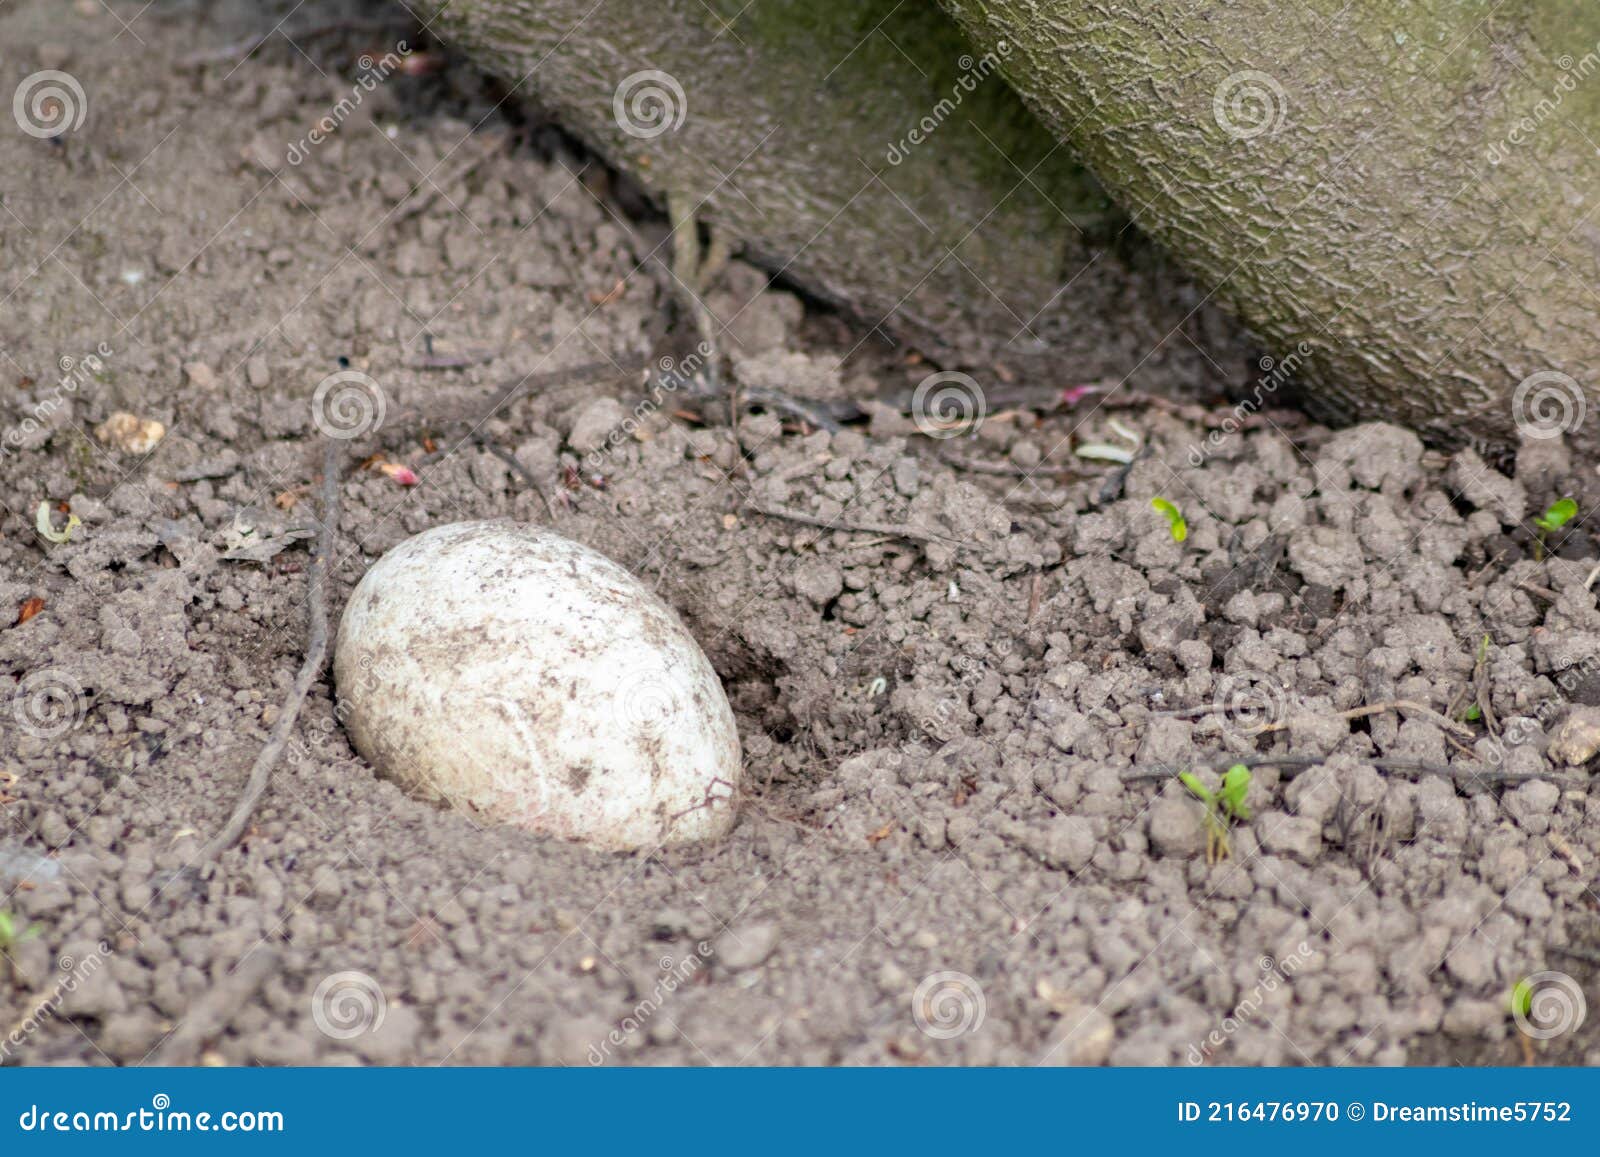 single sprinkled egg in a sand hole for incubation or breeding in sand of reptiles and coldblooded animals like crocodiles